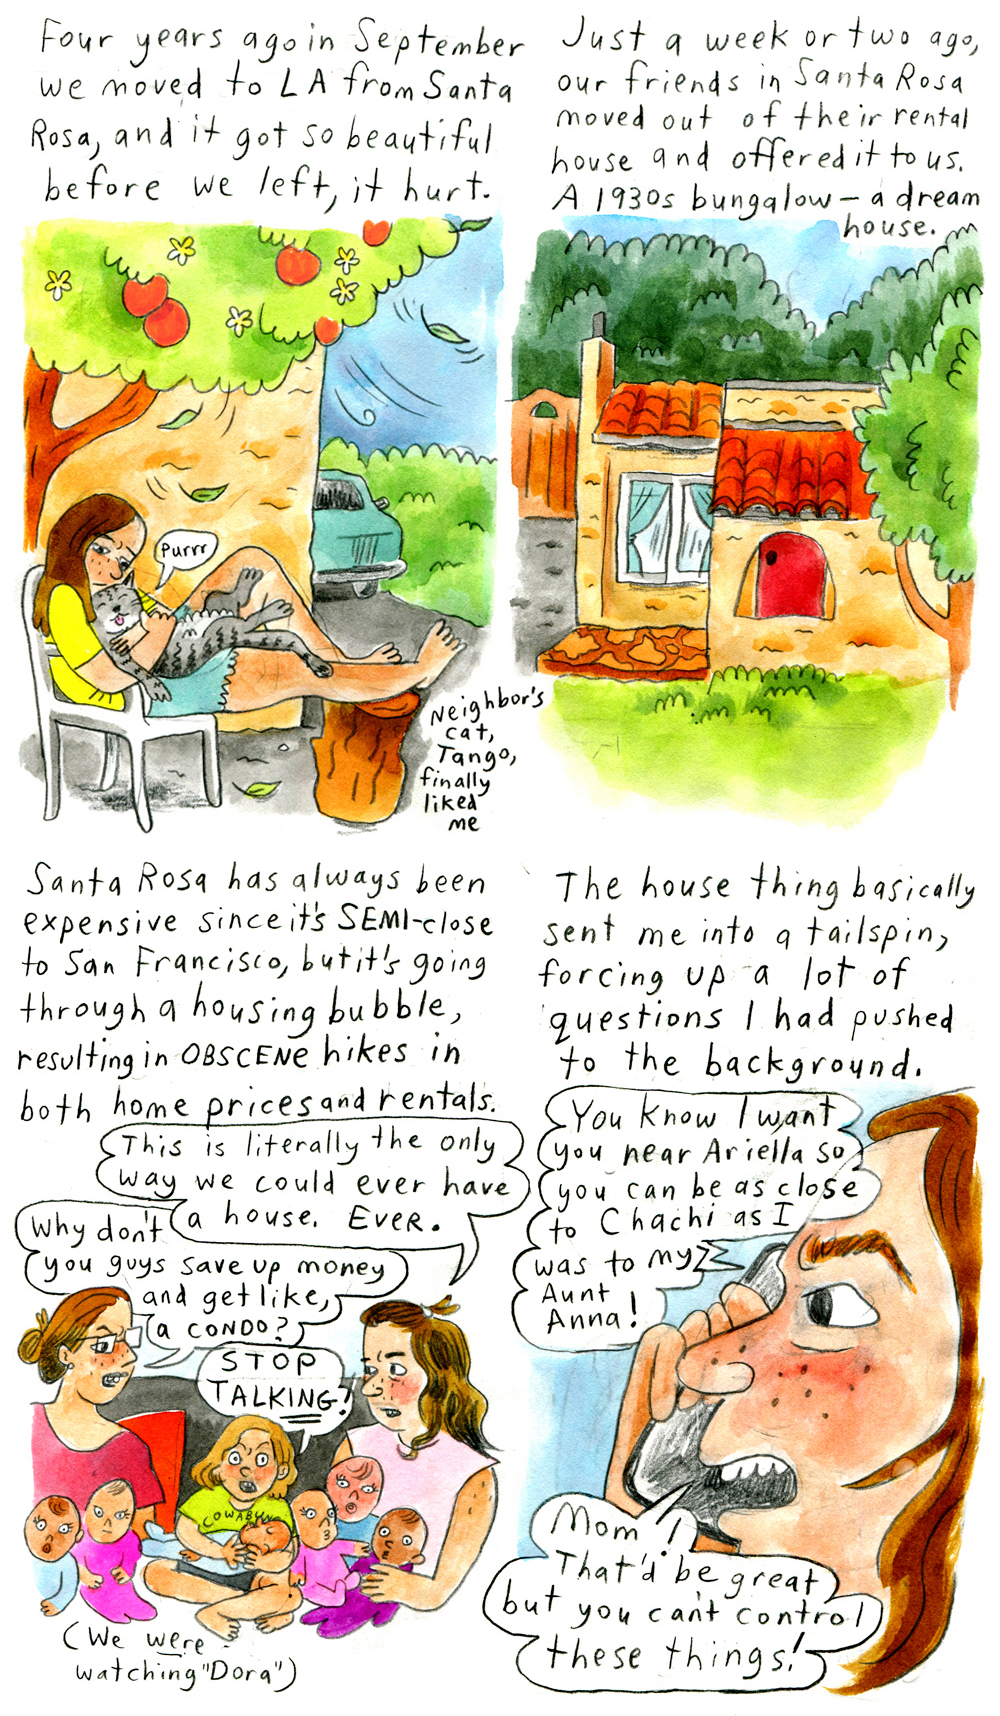 11. "Four years ago in September we moved to L.A. from Santa Rosa, and it got so beautiful before we left, it hurt."
Vanessa sits outside in an Adirondack chair, resting her feet on a tree stump in front of her. Above her is a blossoming apple tree. She cuddles with a purring cat - her "neighbor's cat, Tango" who "finally liked me." Wind blows in the background against a blue sky. Vanessa looks solemn. The cat looks blissful.

12. "Just a week or two ago, our friends in Santa Rosa moved out of their rental house and offered it to us. A 1930s bungalowâ€”a dream house."
A beautiful 1930s bungalow, with Spanish-style terracotta tile roofing, stands on a bright green yard with a tree in front and lots of trees in the back.

13. "Santa Rosa has always been expensive since it's SEMI-close to San Francisco, but it's going through a housing bubble, resulting in OBSCENE hikes in both home prices and rentals."
Vanessa and another woman, perhaps her mom, sit on a couch with a bunch of little kids and babies sitting in their laps. Vanessa says, "This is literally the only way we could ever have a house. EVER." The other woman looks upset and replies, "Why don't you guys save up money and get like, a condo?"
The oldest kid yells, "STOP TALKING!" All of the kids' eyes are firmly fixed ahead, watching Dora.

14. "The house thing basically sent me into a tailspin, forcing up a lot of questions I had pushed to the background."
Vanessa is on a phone call and looks angry. The person on the phone says: "You know I want you near Ariella so you can be as close to Chichi as I was to my Aunt Anna!" Vanessa replies, "Mom! That'd be great but you can't control these things!"